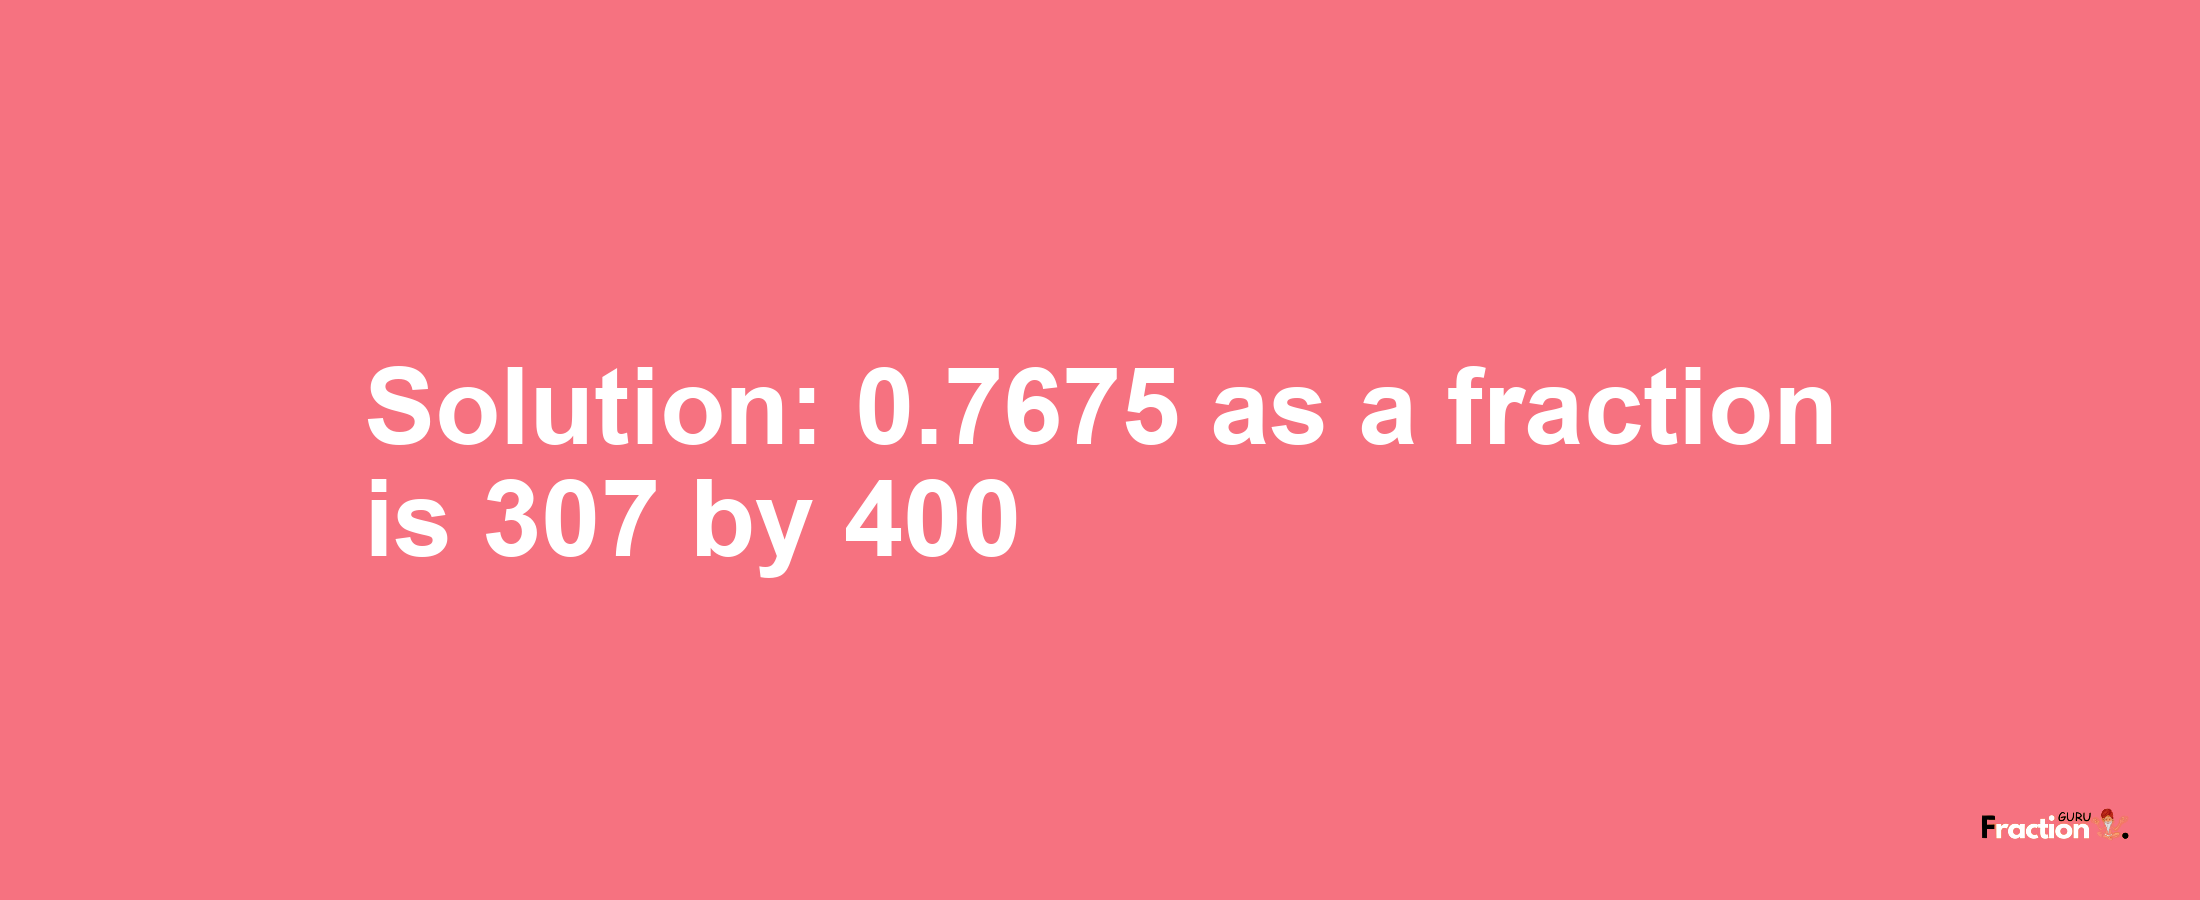 Solution:0.7675 as a fraction is 307/400